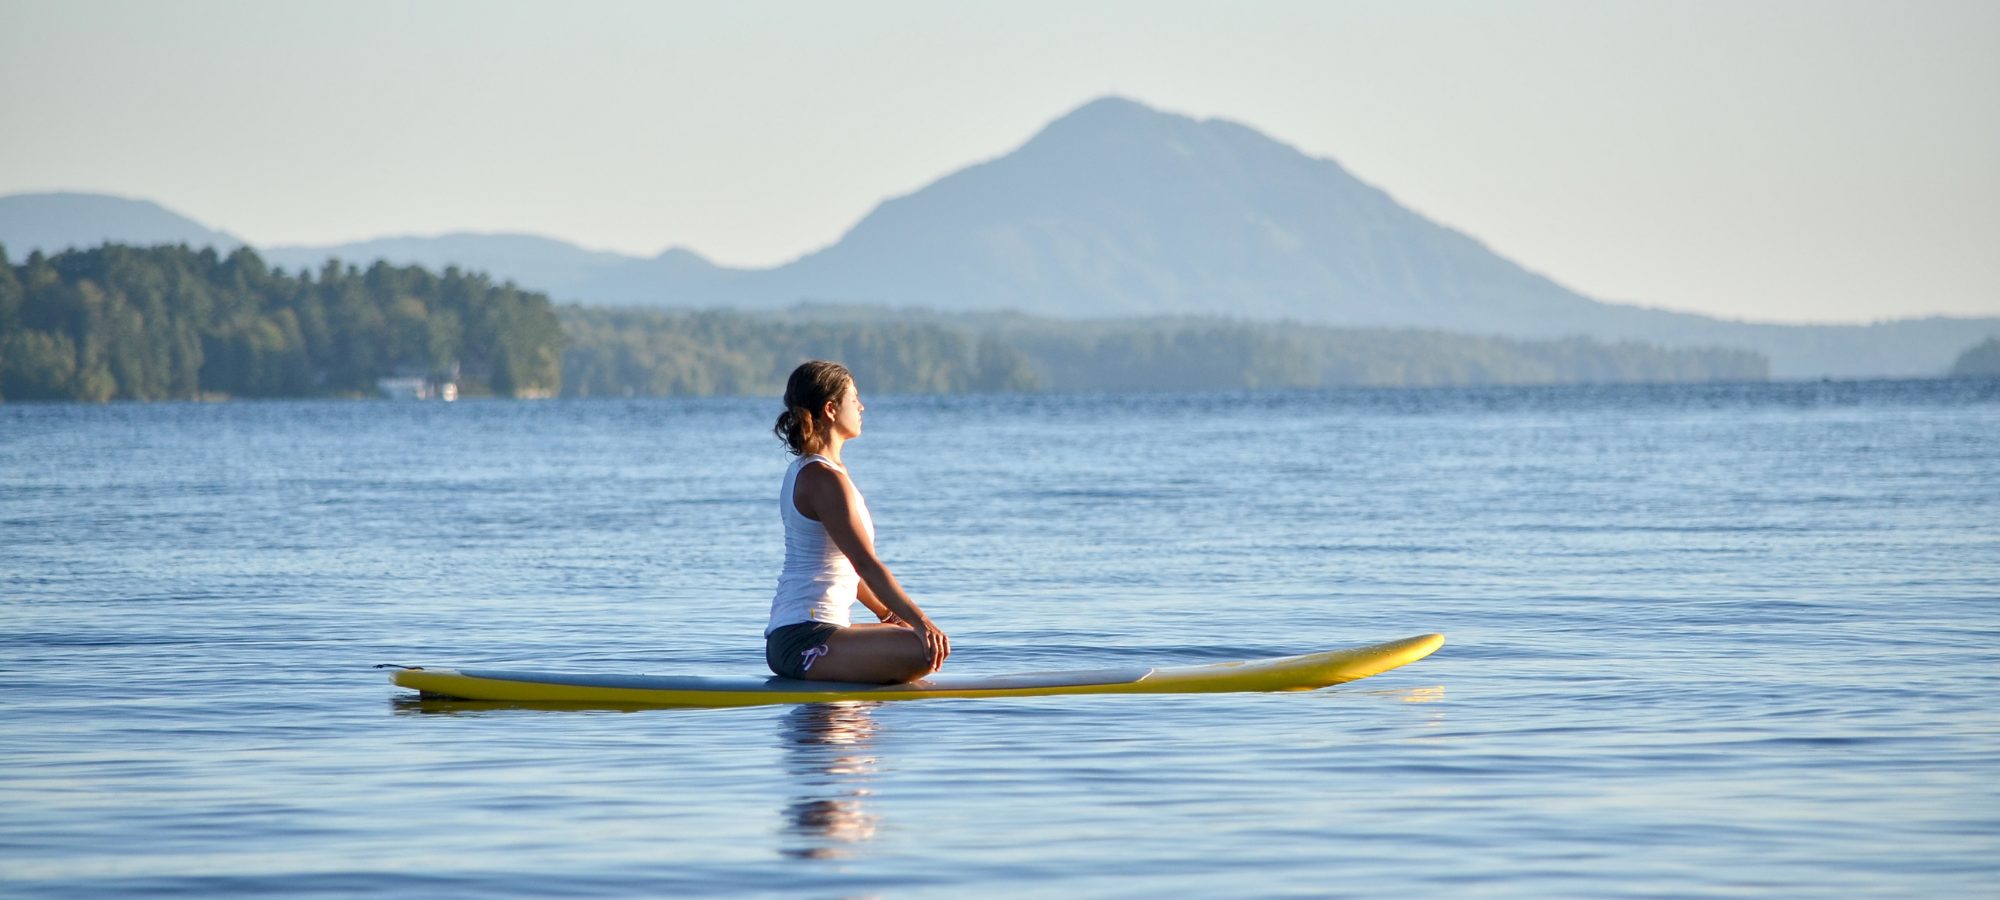 exciting activities, stand up paddle boarding woman